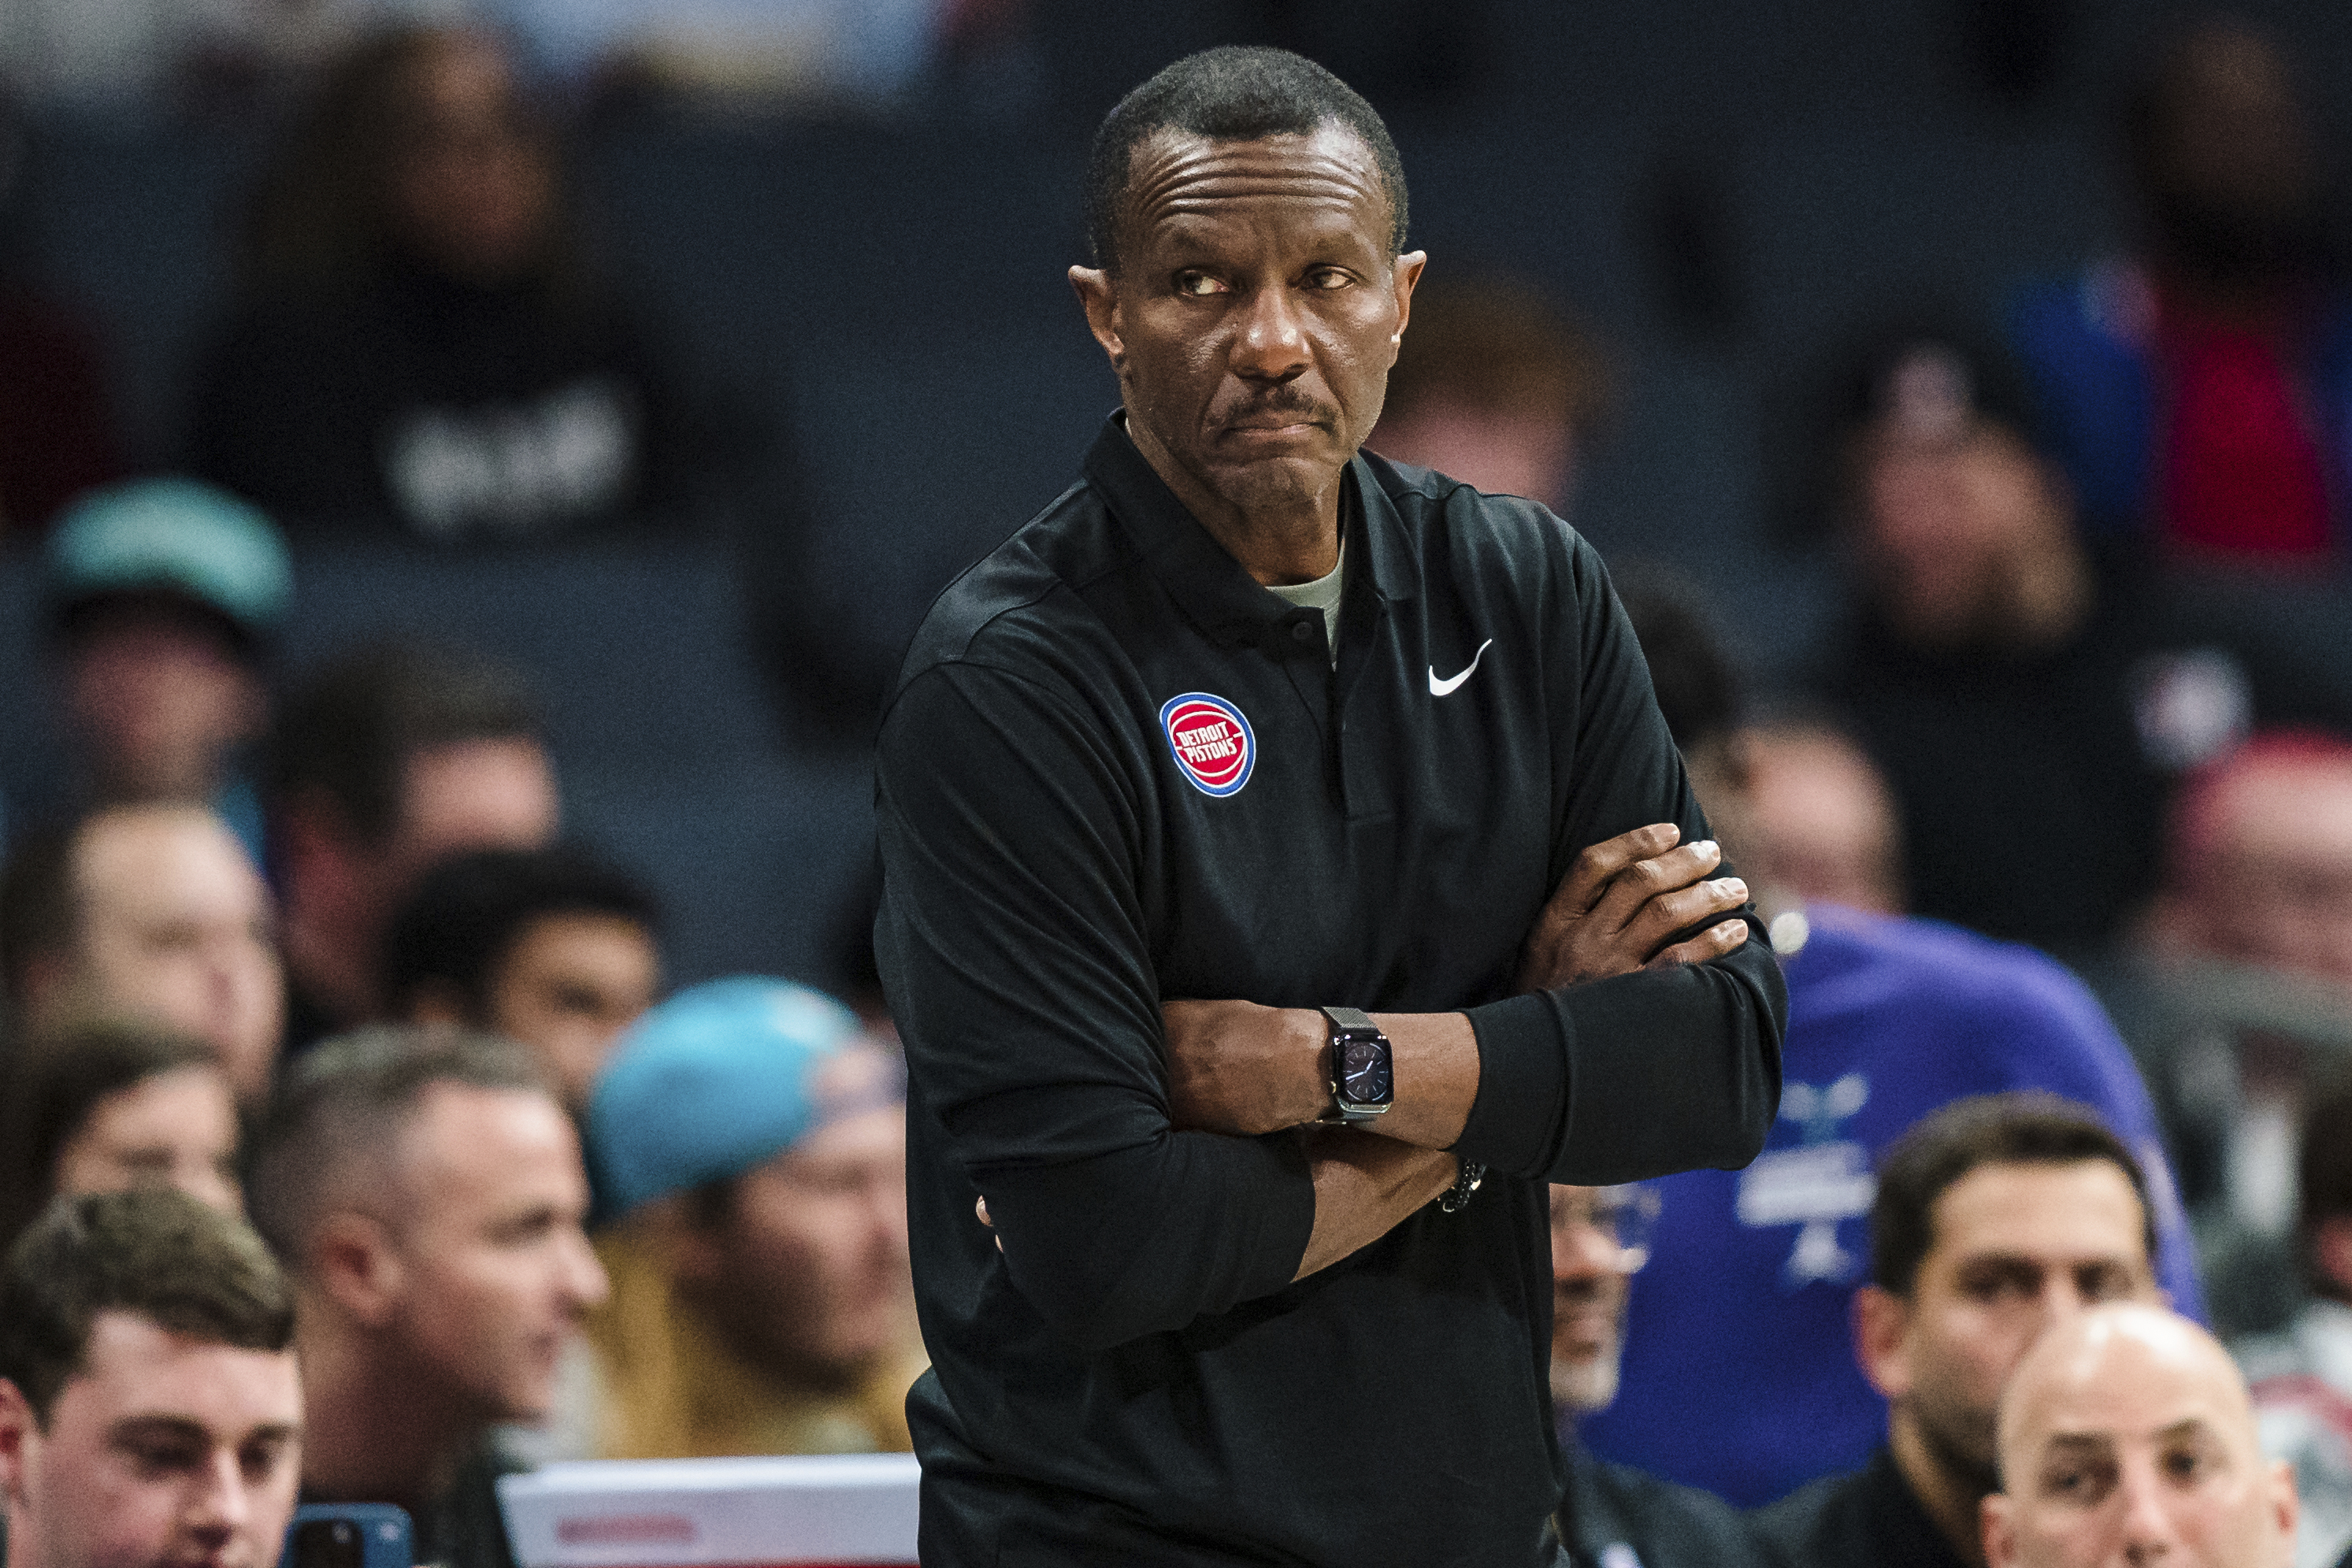 Dwane Casey steps down as Pistons coach, will join front office